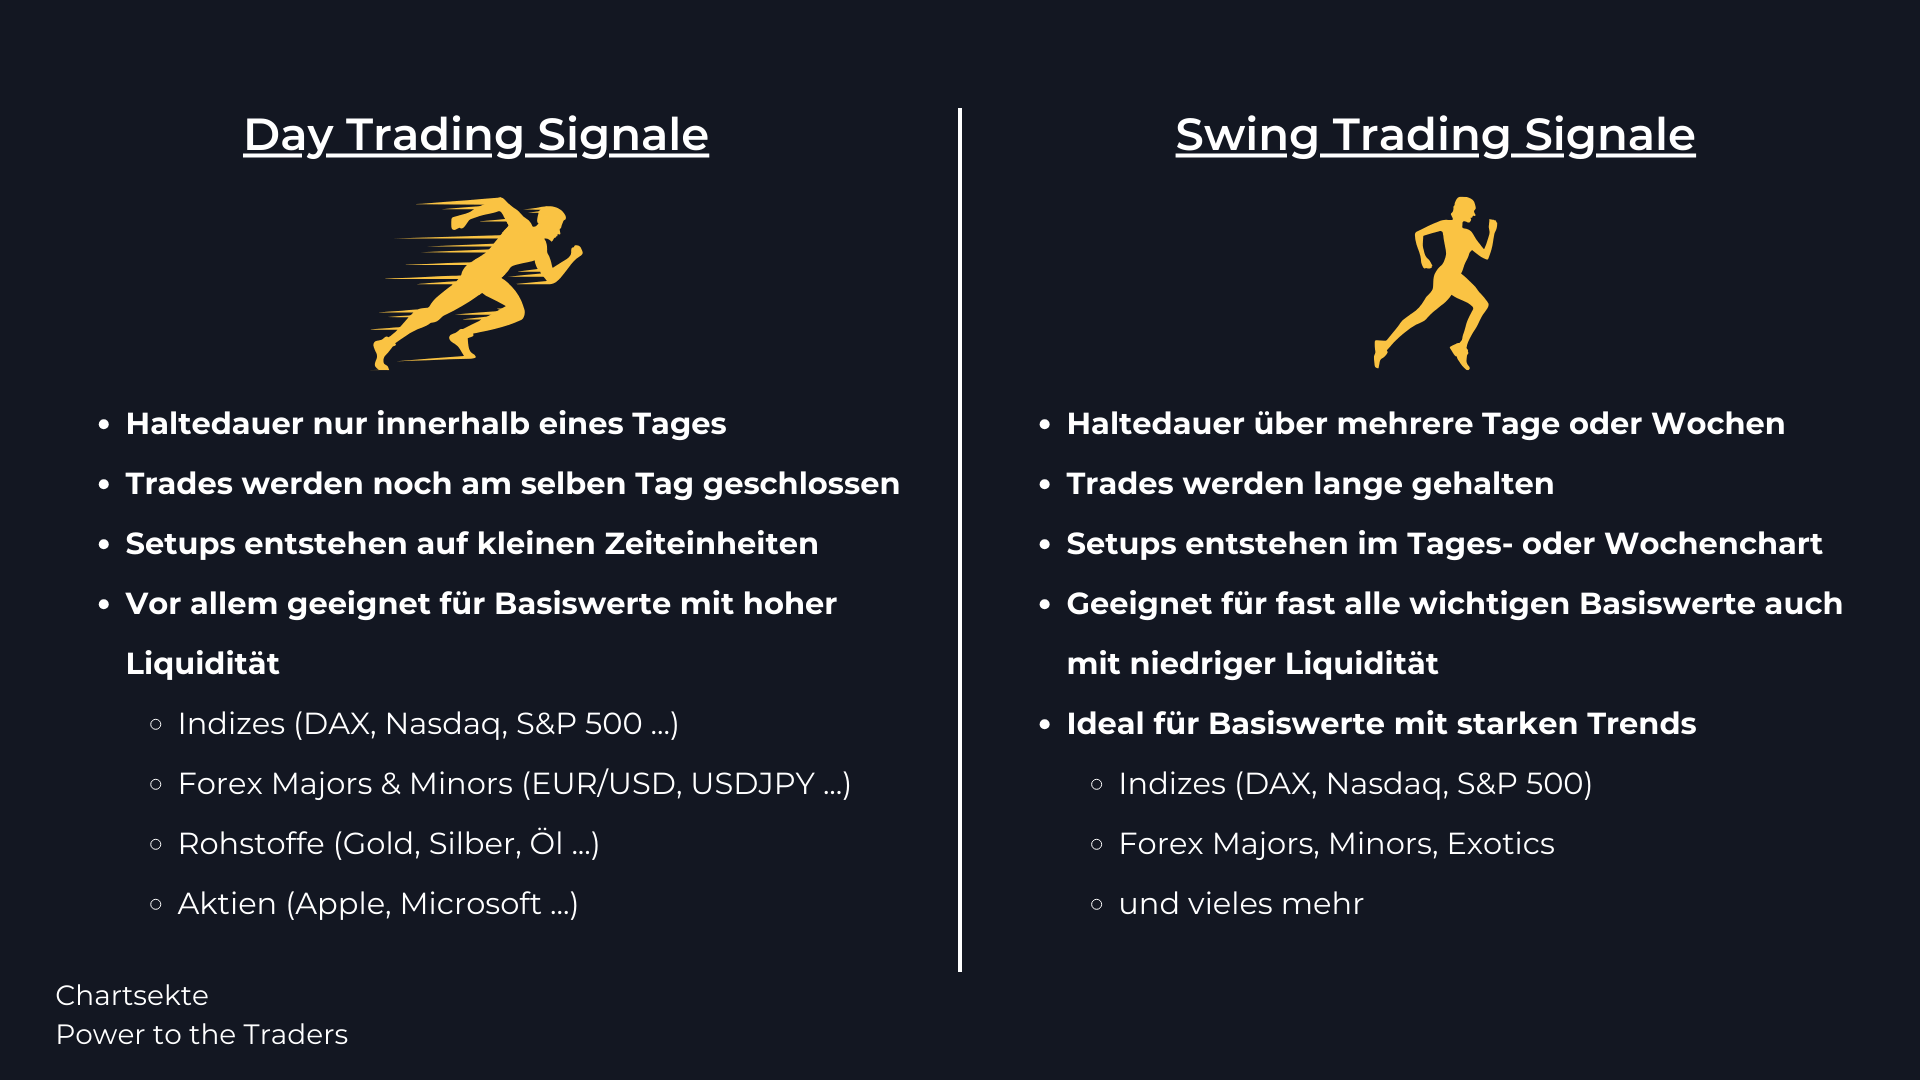 Day Trading Signale versus Swing Trading Signale